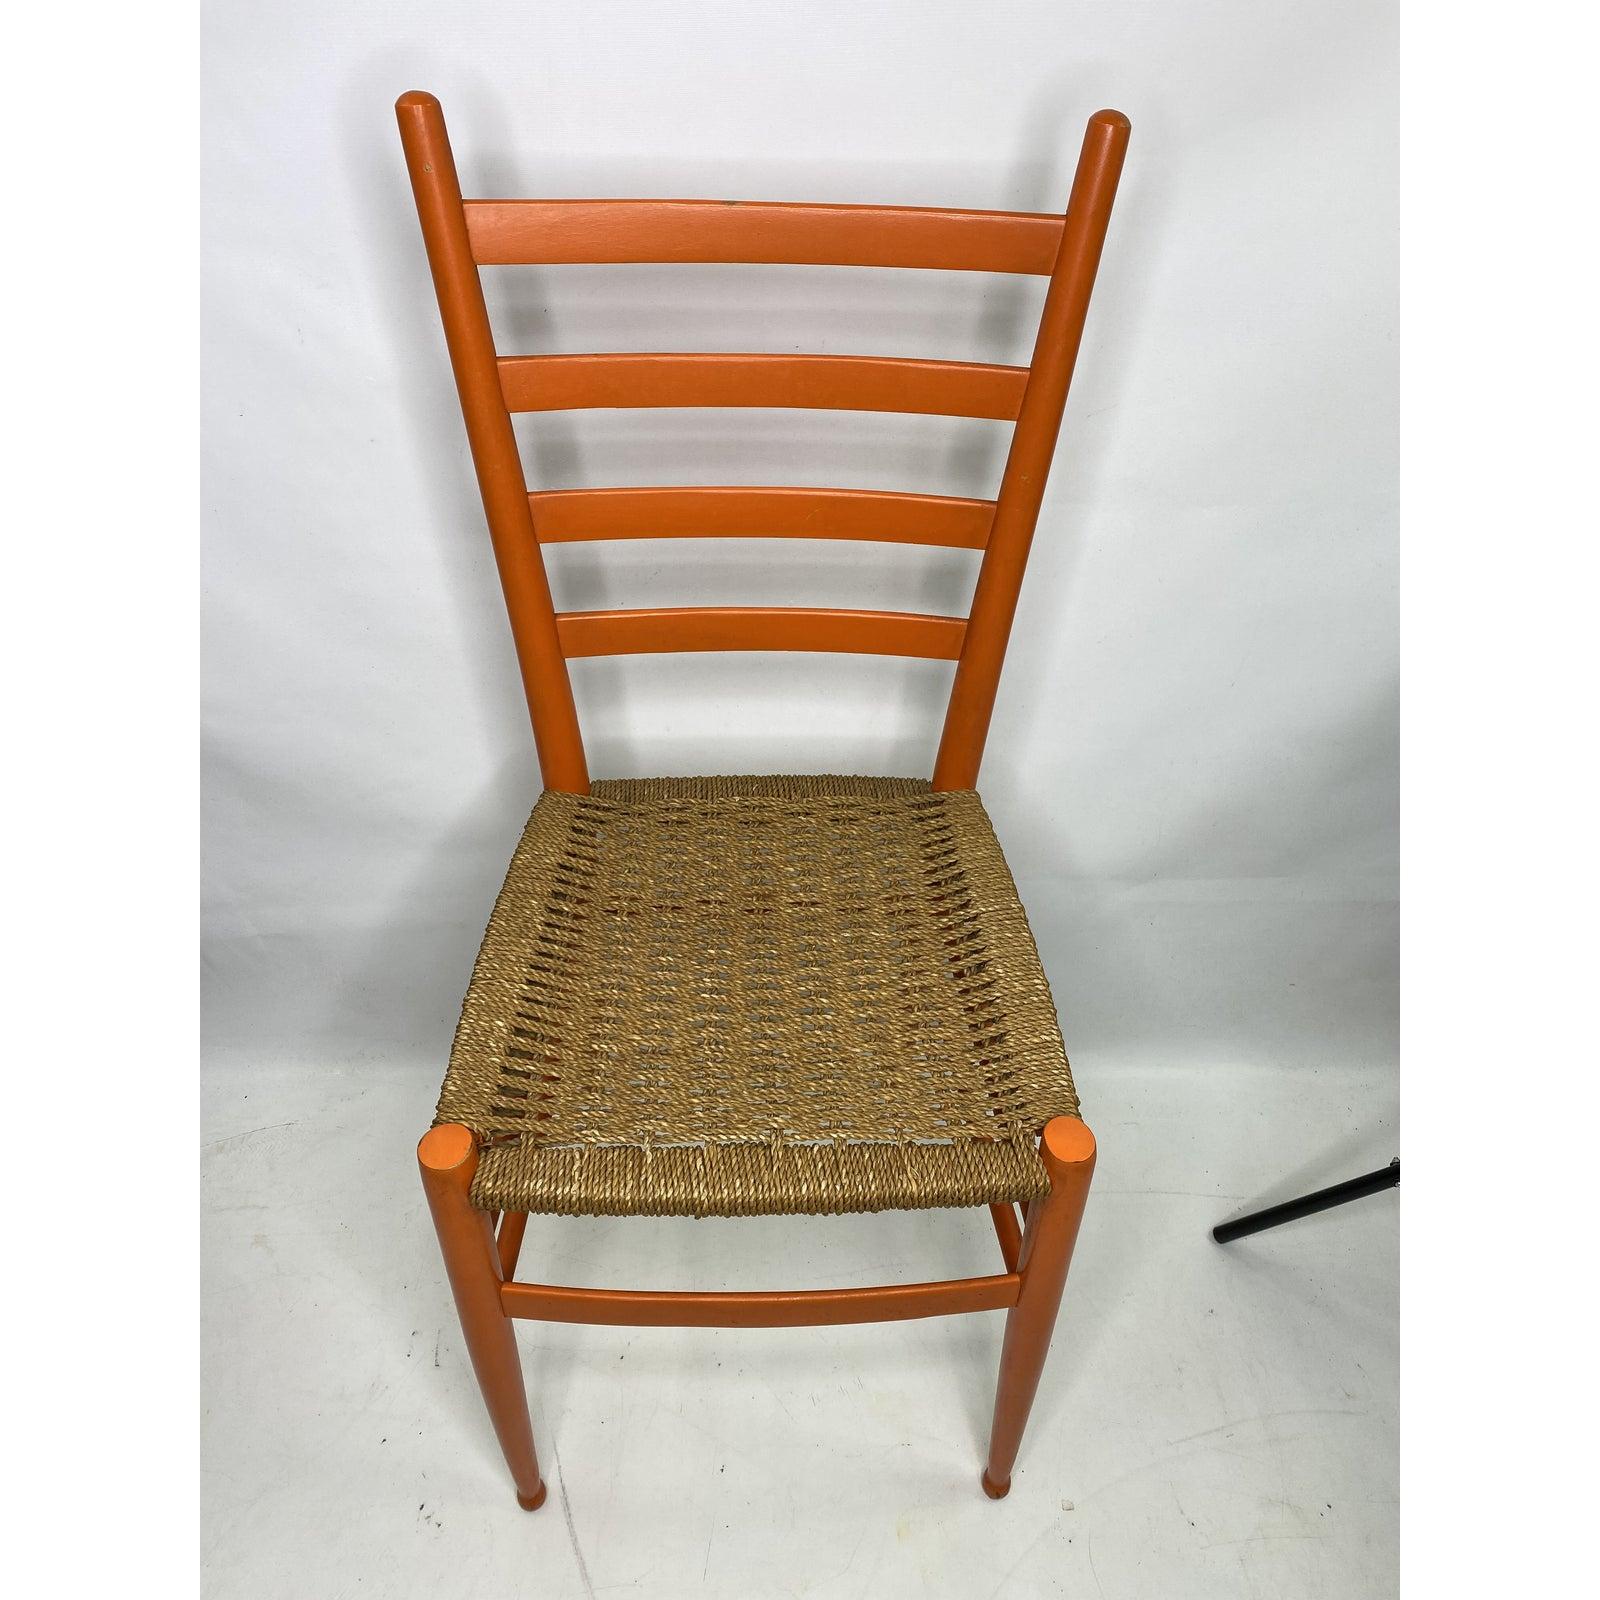 Vintage Gio Ponti style orange chair, made in Italy.
 